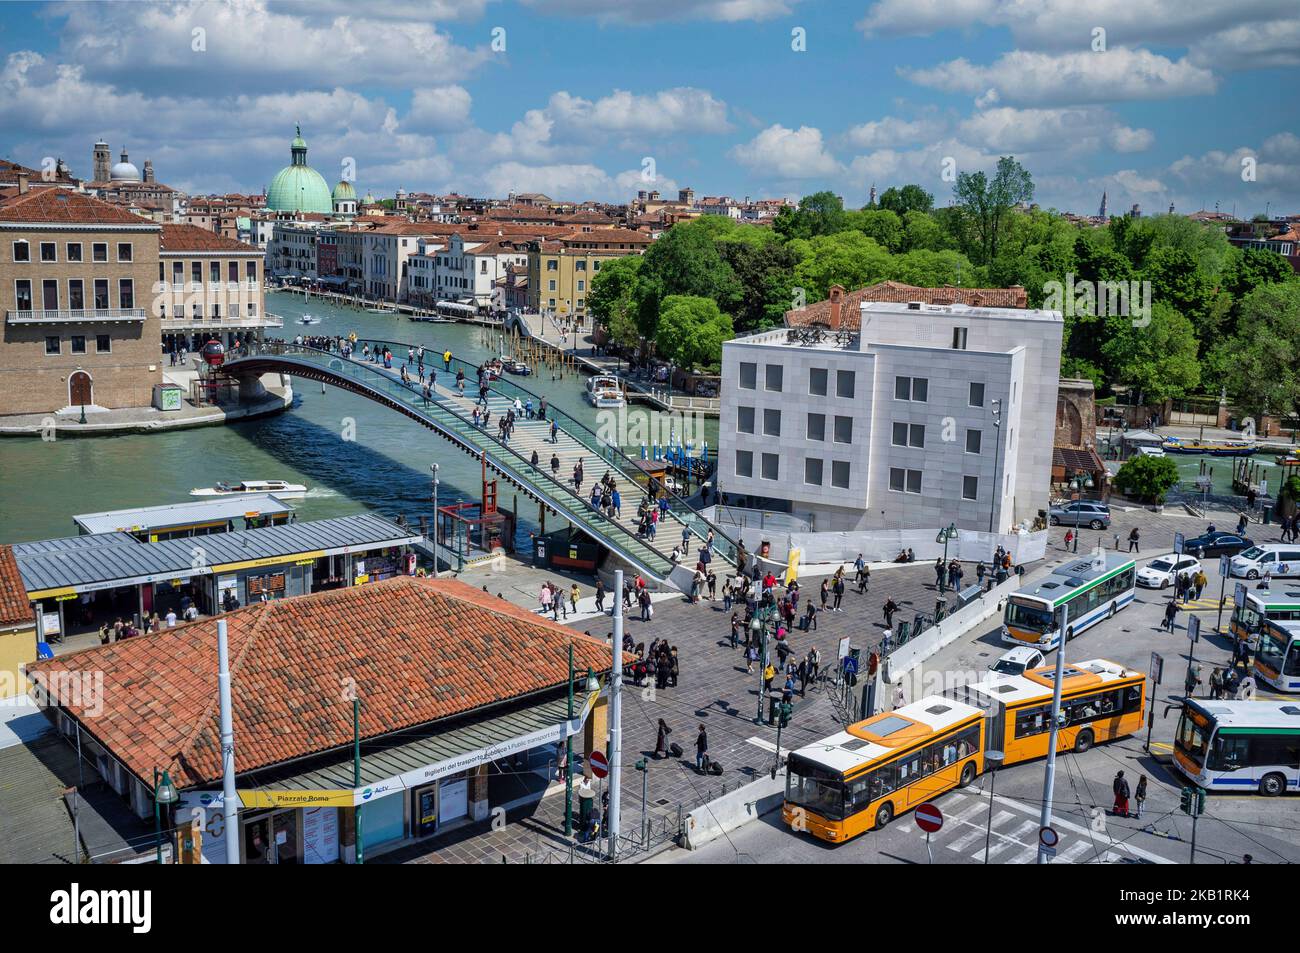 Venice, Italy - May 10, 2019: Piazzale Roma public transport in Venice, tram and bus station, with Ponte della Costituzione over the Grand Canal, This Stock Photo